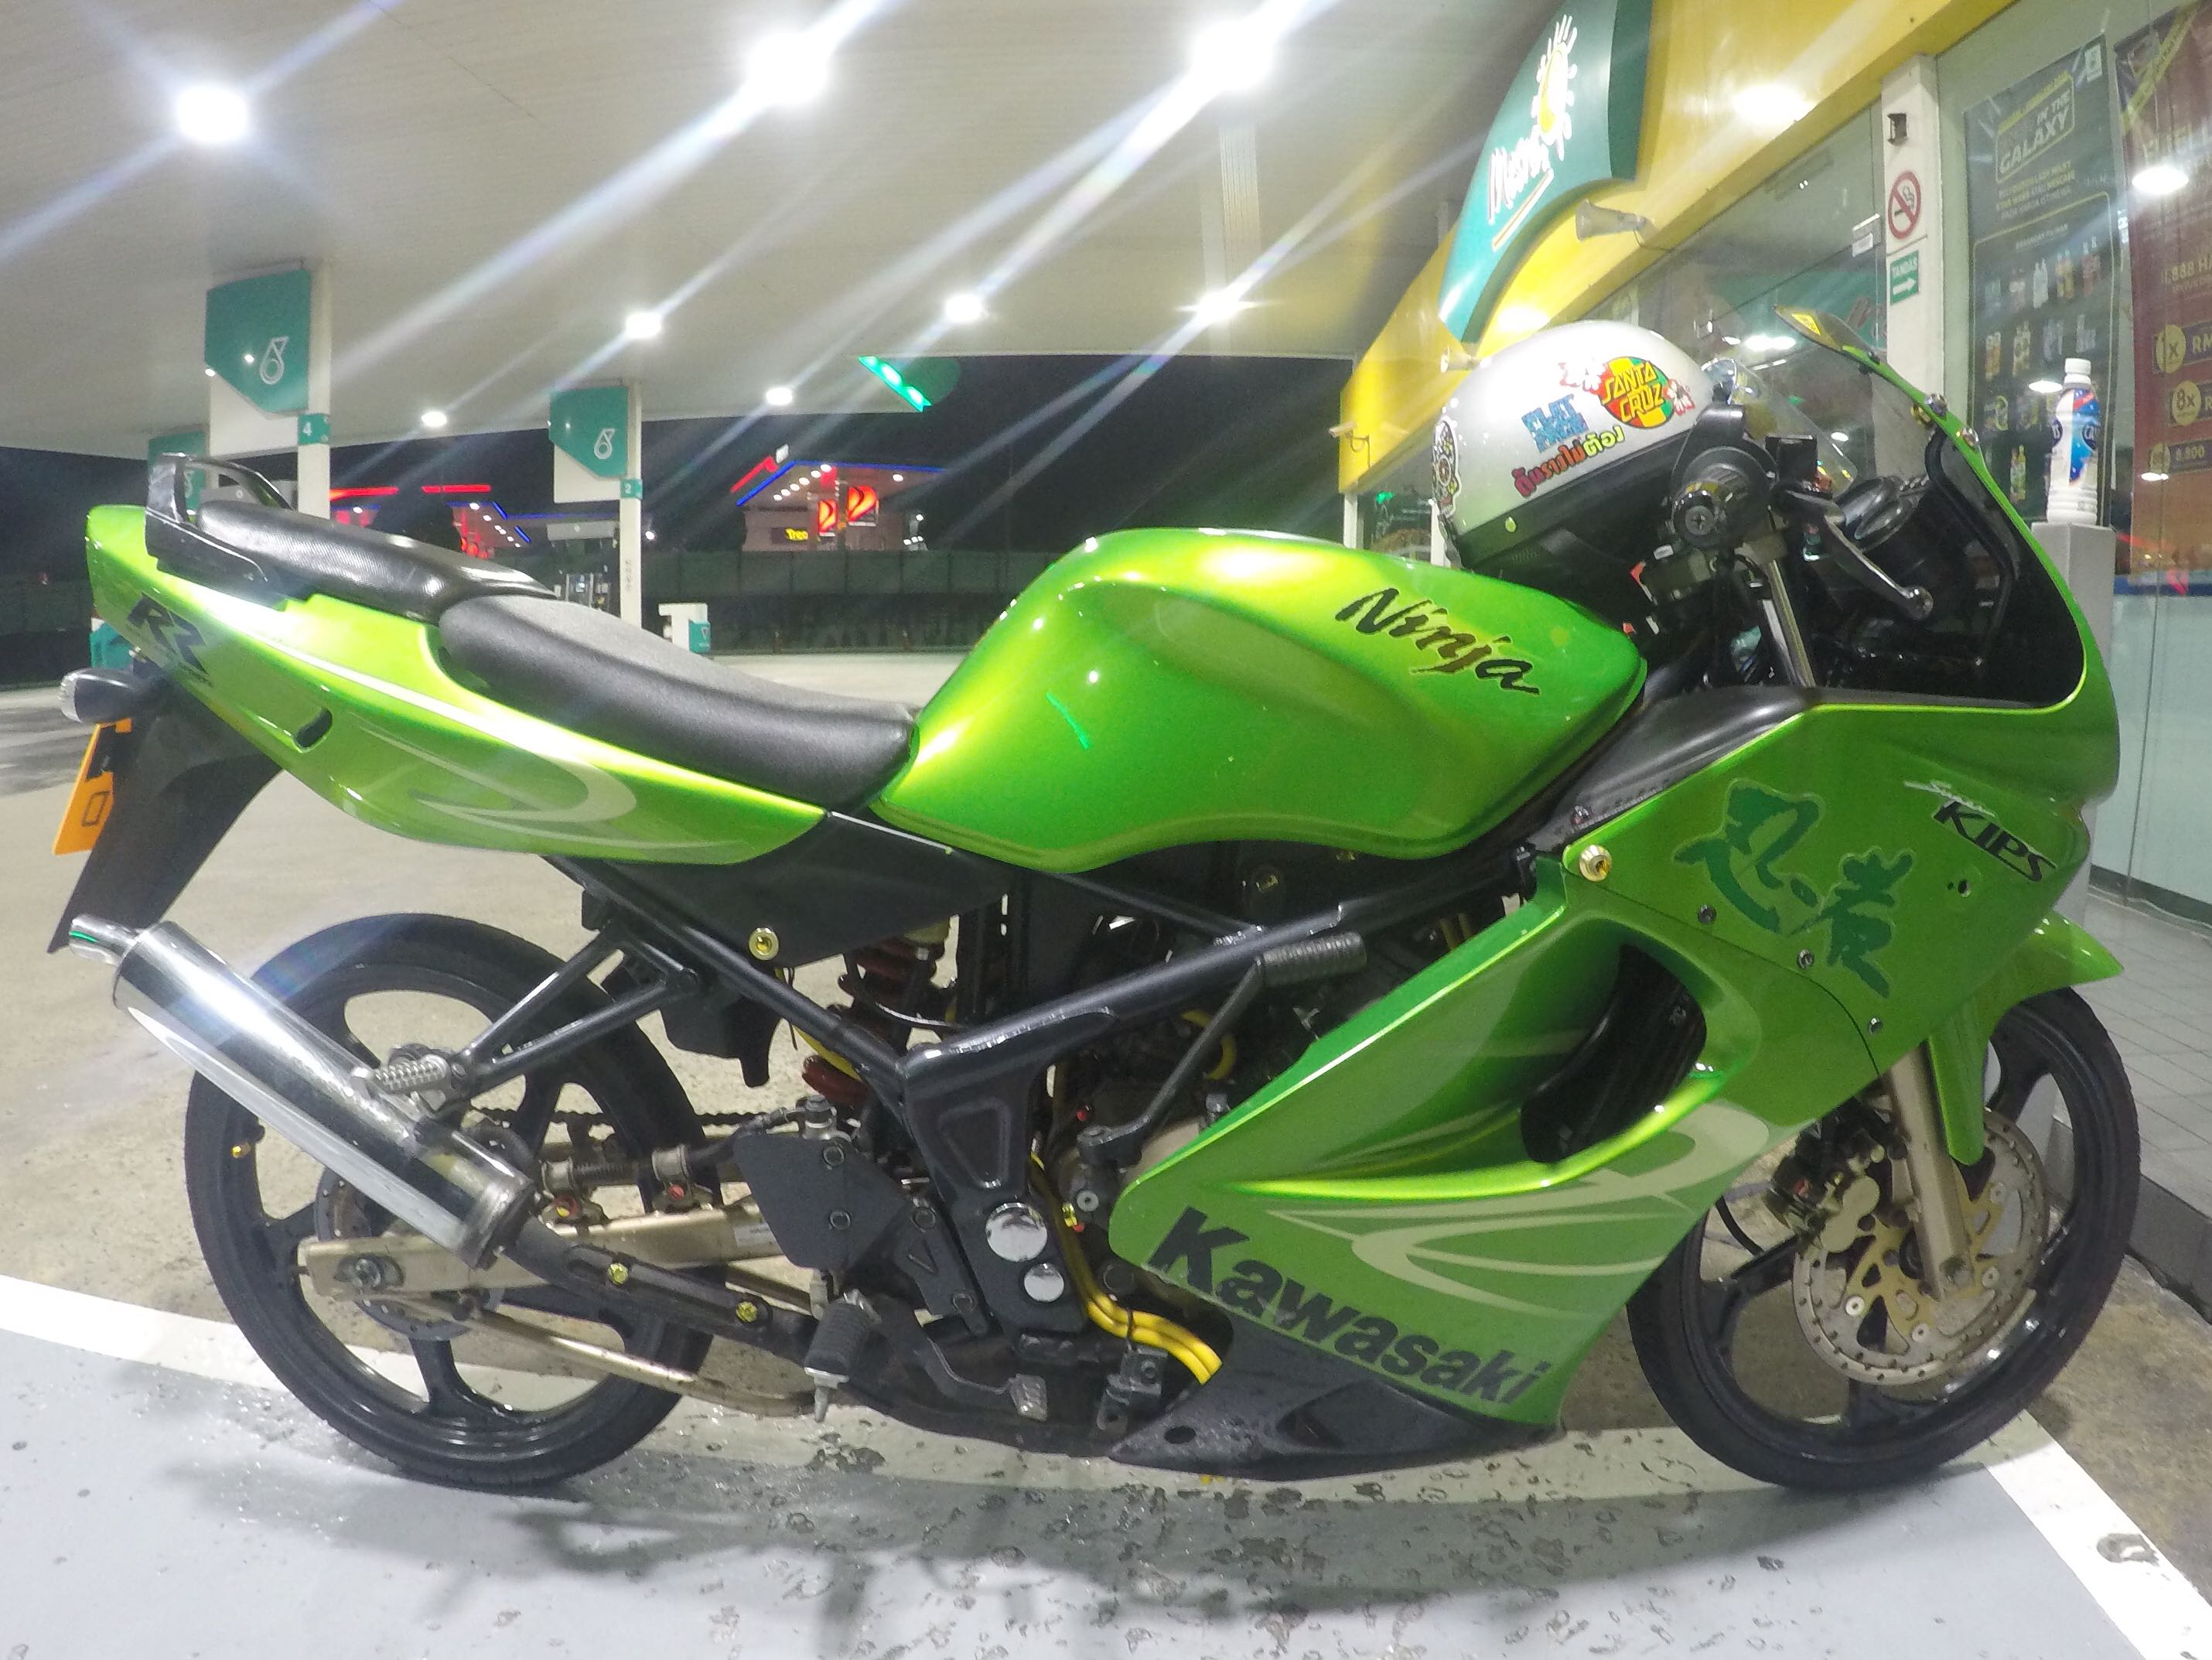 Kawasaki Kr Krr Zx150 Double R Rr Kenji Hijau Green Coverset Motorcycles Motorcycle Accessories On Carousell